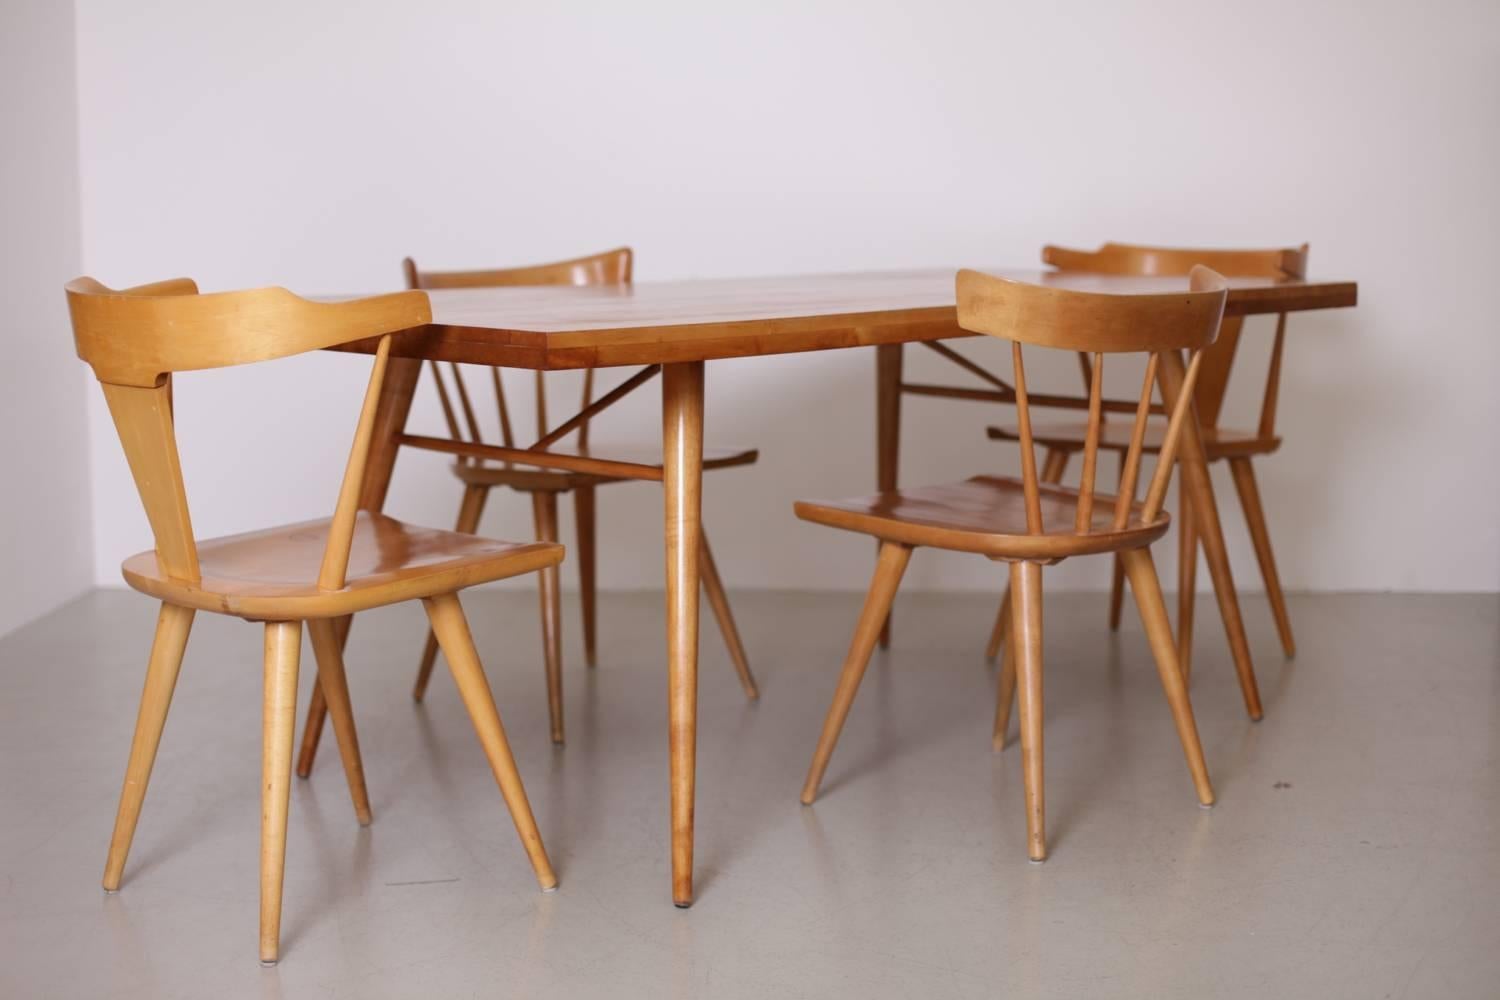 Amazing Paul McCobb maple Planner Group dining set produced by Winchendon. The set includes two spindle back chairs, two T-back chairs and a dining table in maple. All pieces are in very good condition.

Measurements chairs:
D 44.5 cm,
W 53 cm,
SH